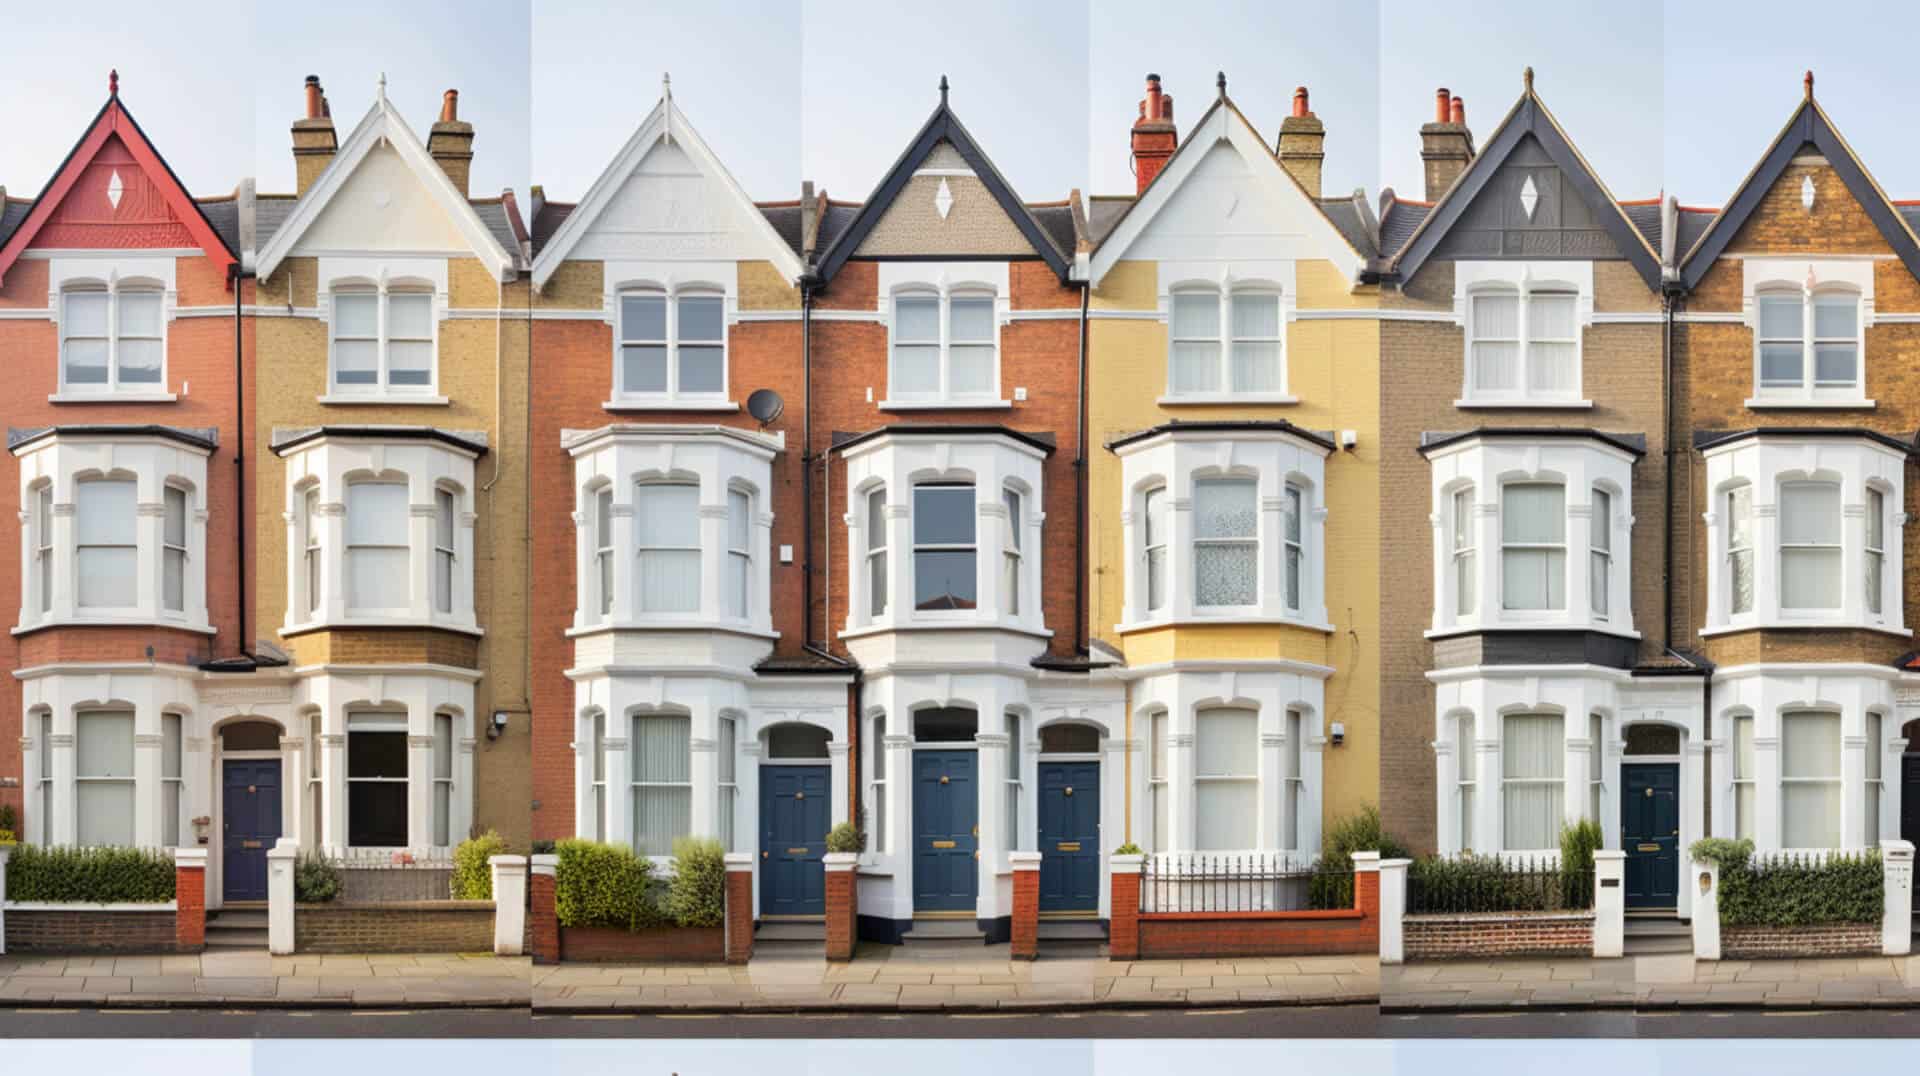 001 putney london houses for sale architectural styles victorian terraces 0 0